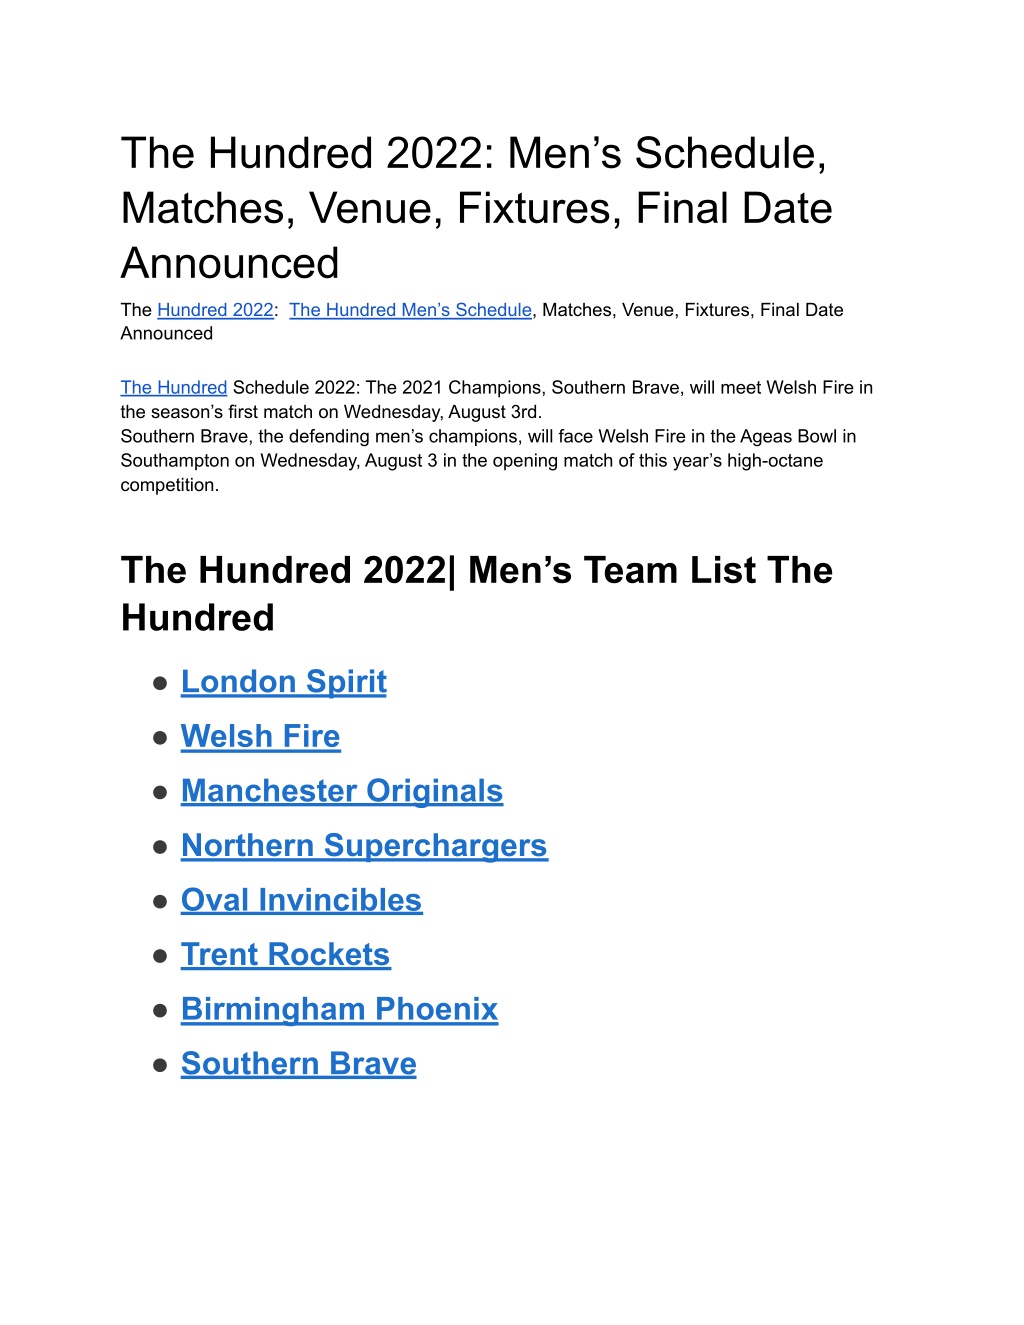 Ppt The Hundred 2022 Mens Schedule Matches Venue Fixtures Final Date Announced 5195